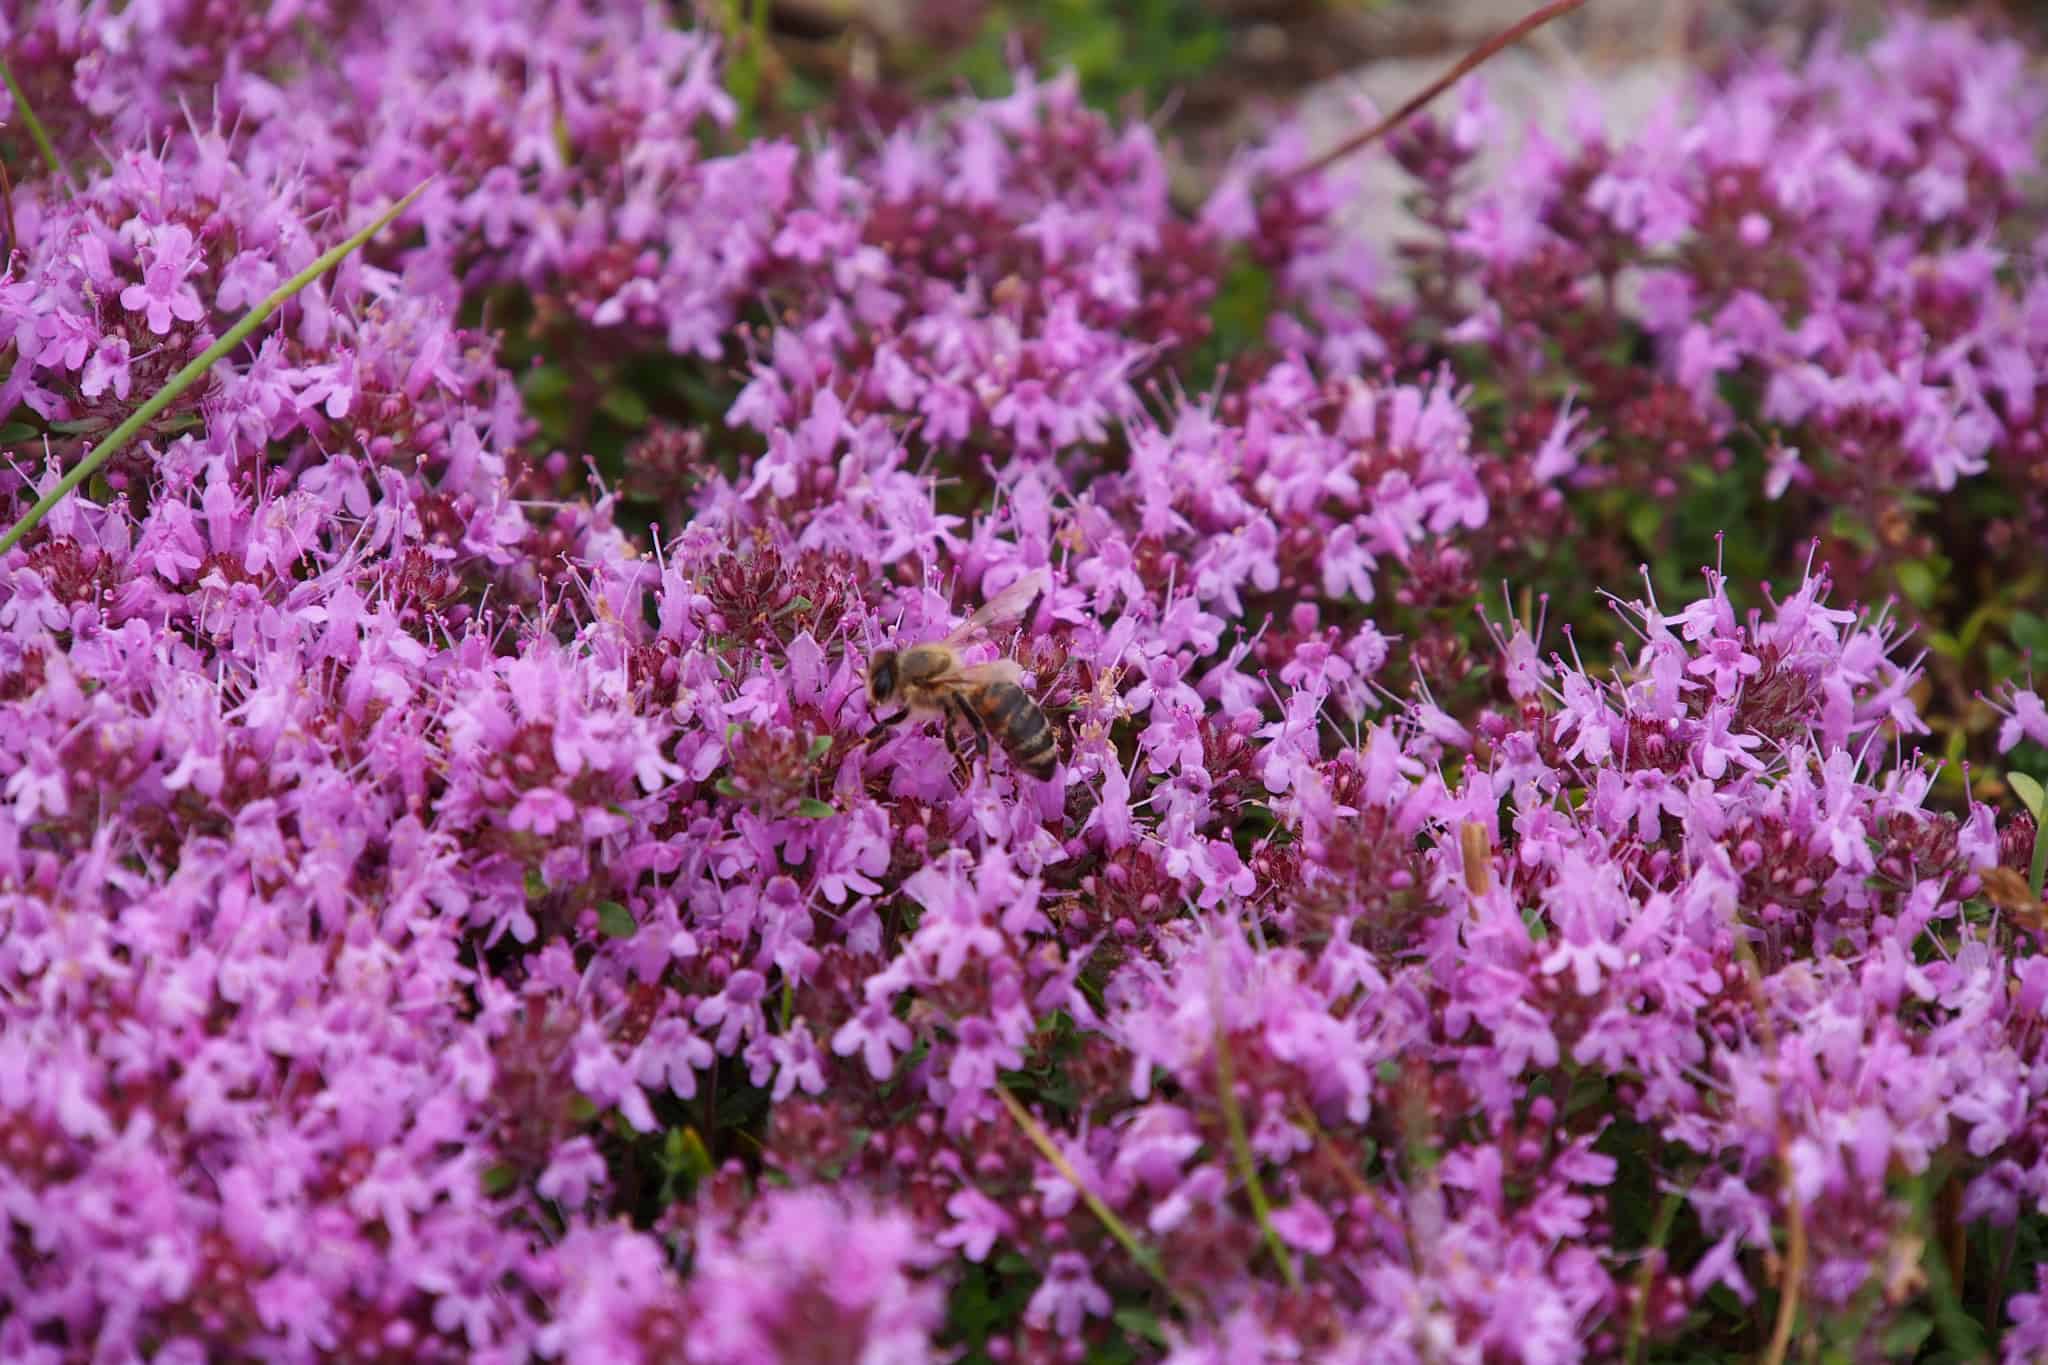 Flowering thyme in the Lueneburg Heath nature reserve | VNP Stiftung